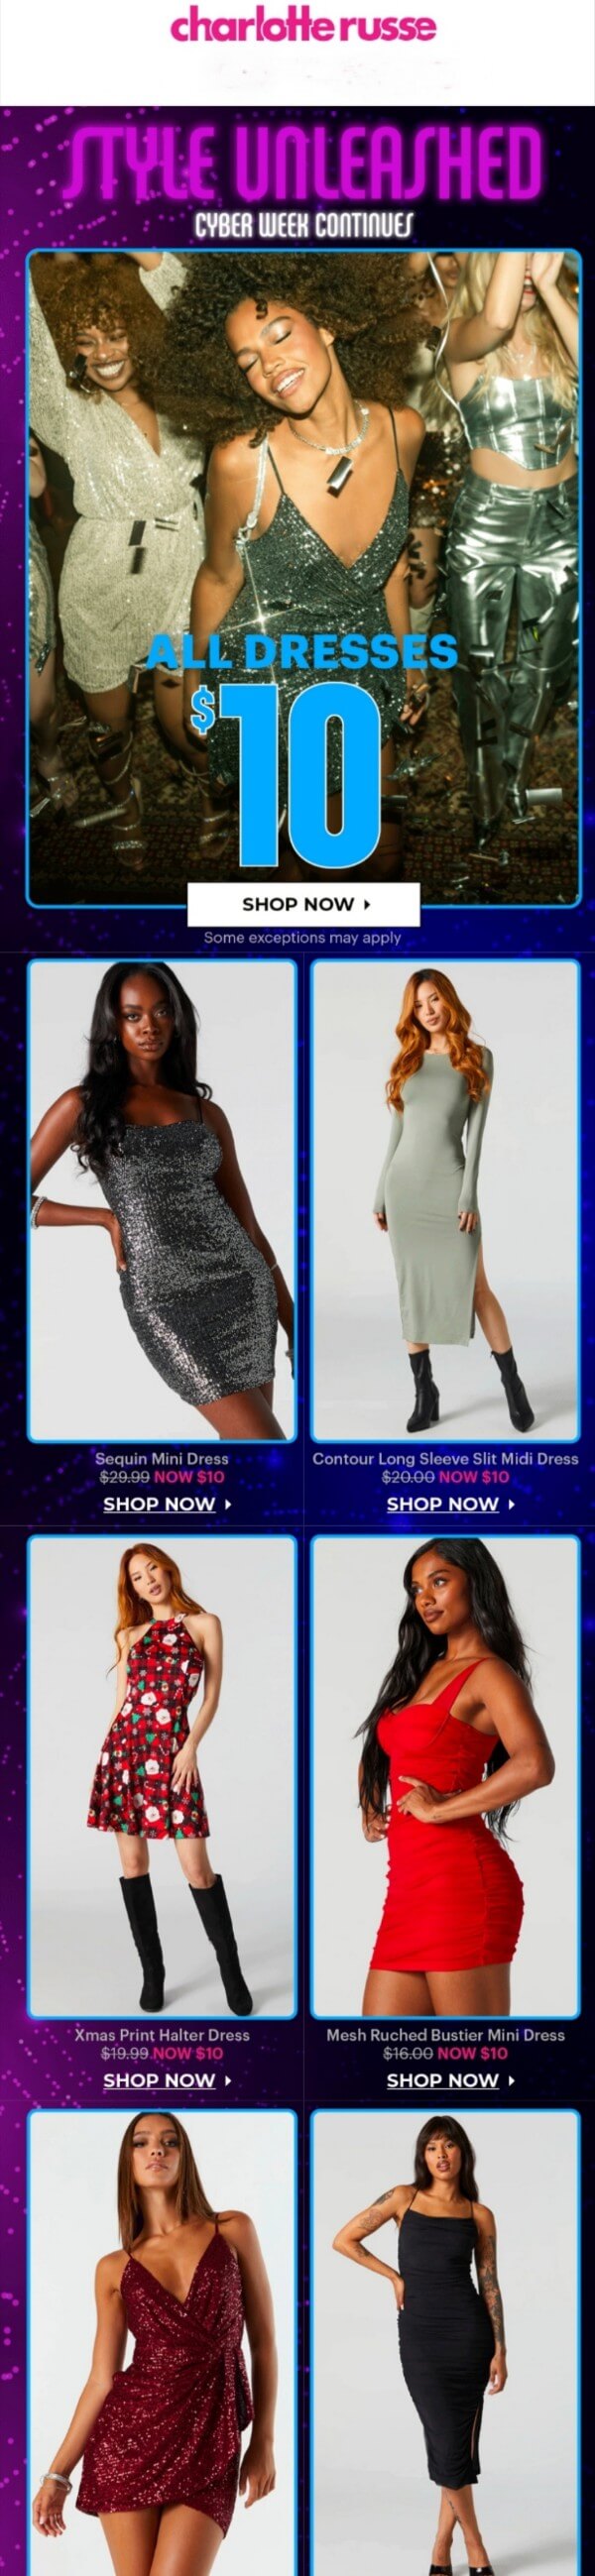 Charlotte Russe stores Coupon  All dresses $10 at Charlotte Russe #charlotterusse 